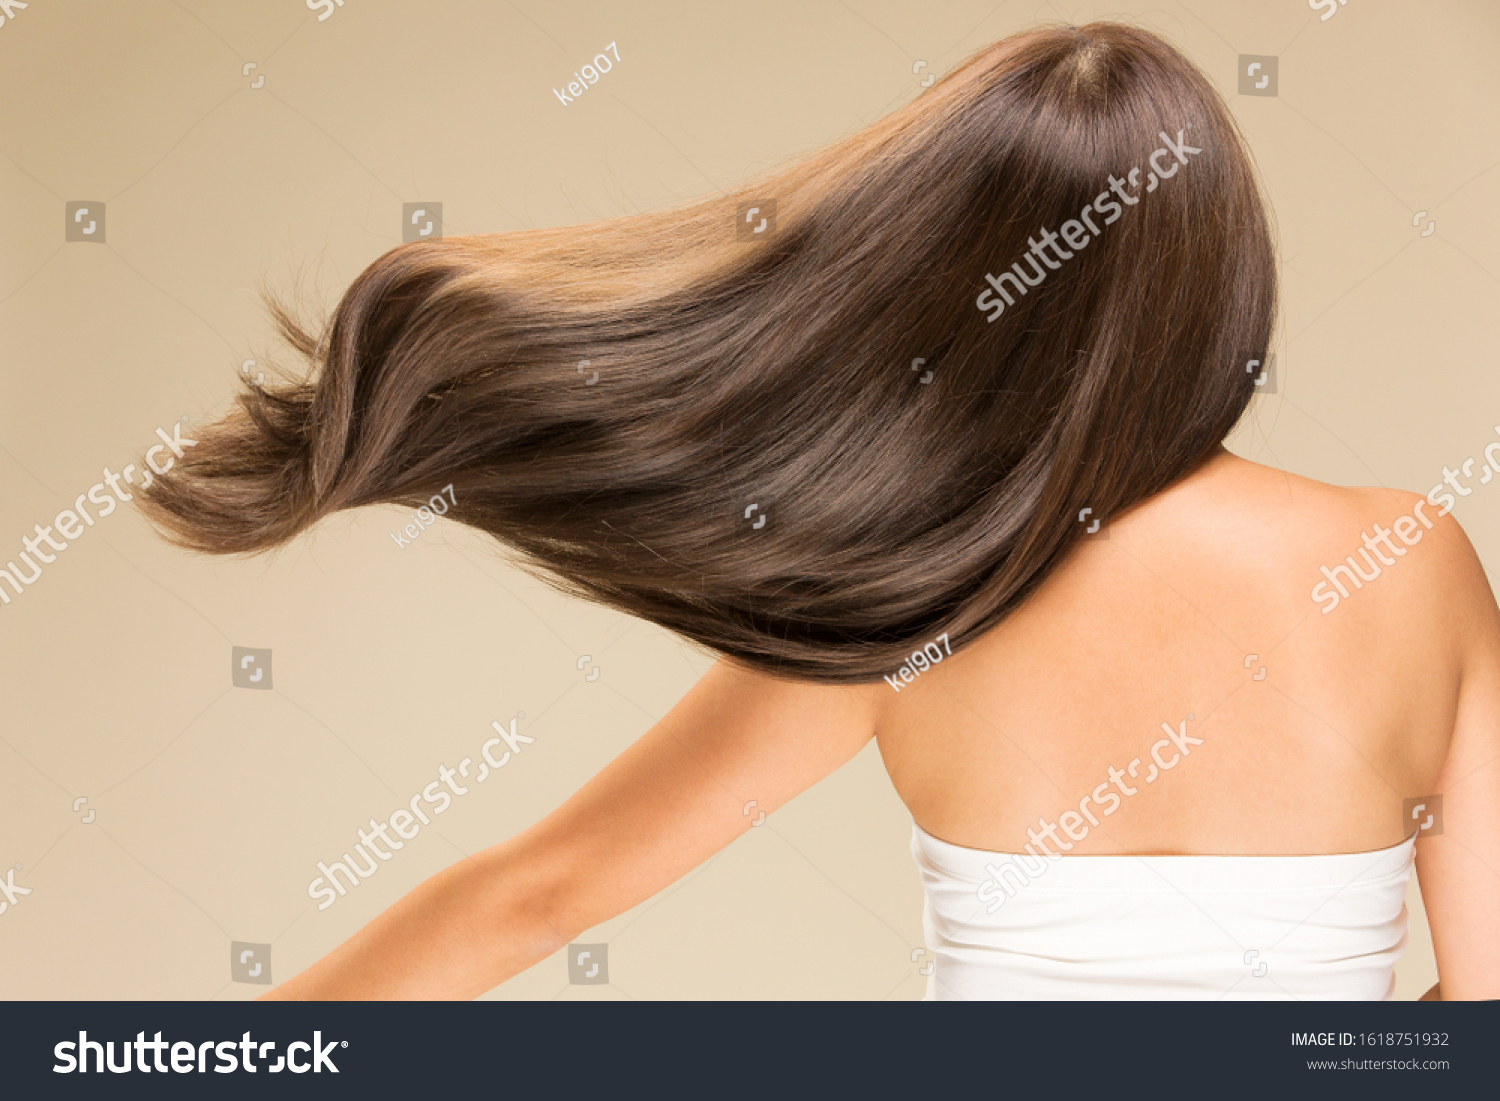 Lively hair on a beige background. #1618751932